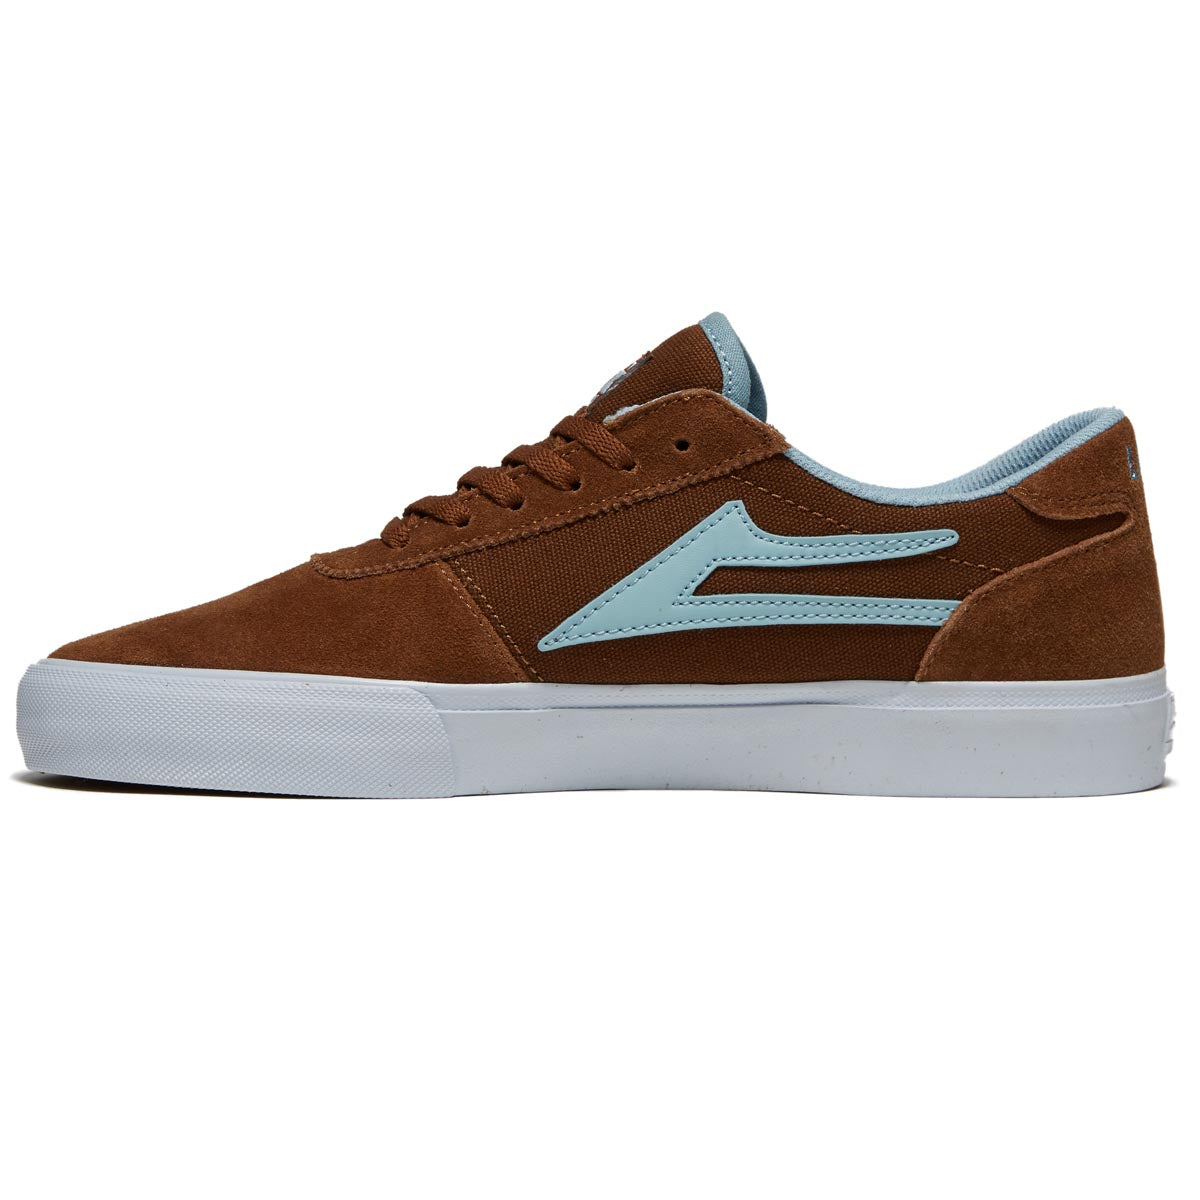 Lakai Manchester Shoes - Brown Suede image 2